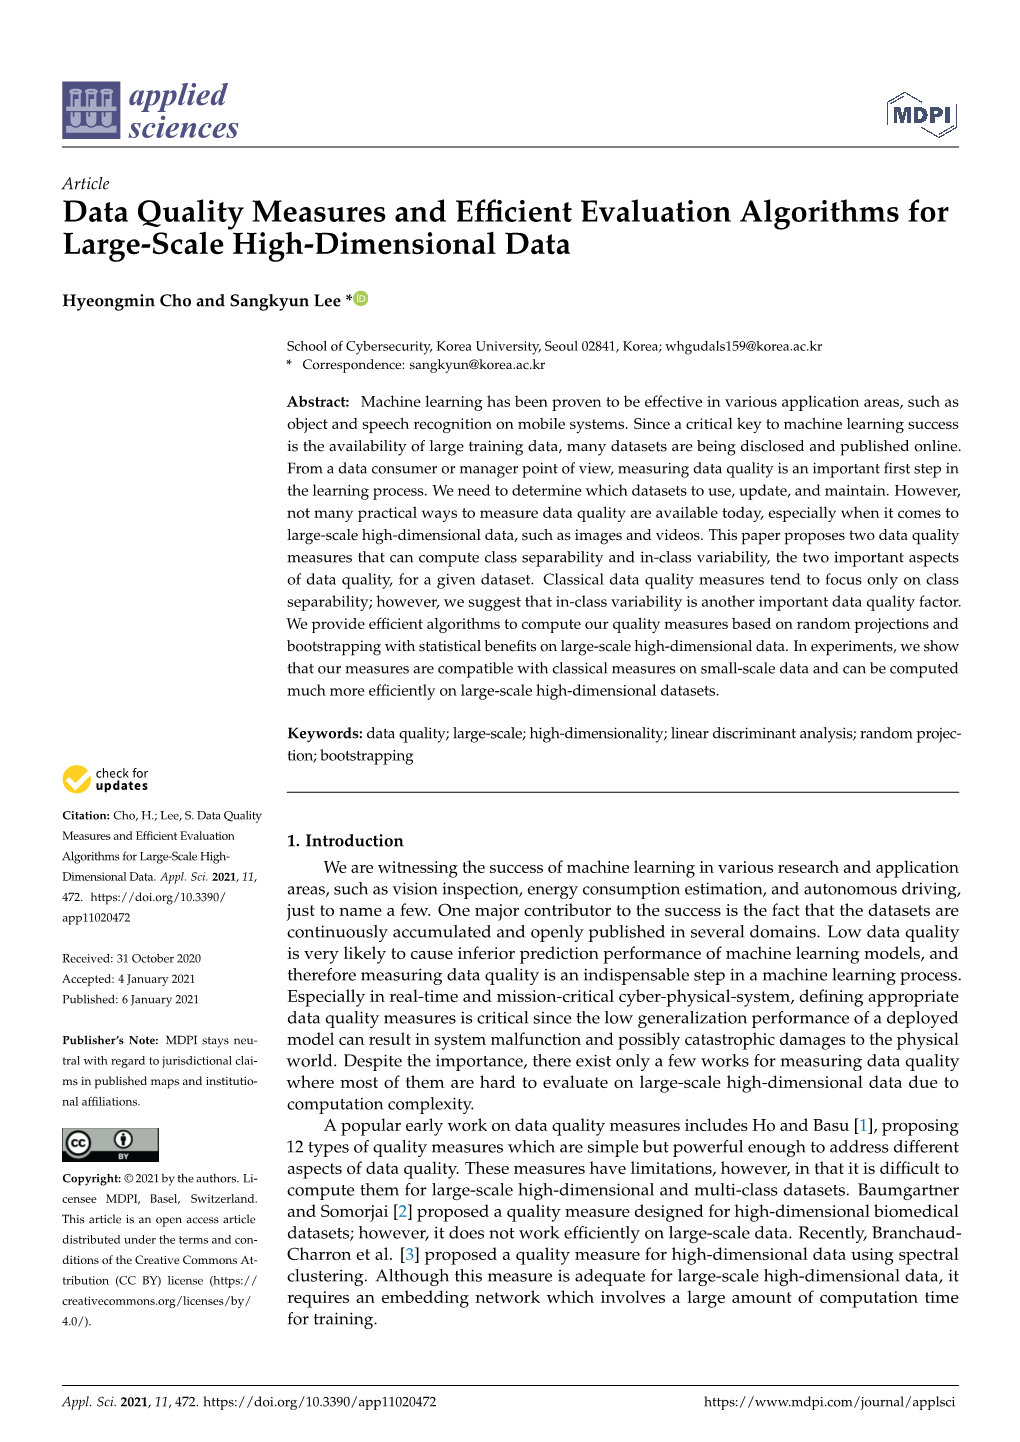 Data Quality Measures and Efficient Evaluation Algorithms for Large